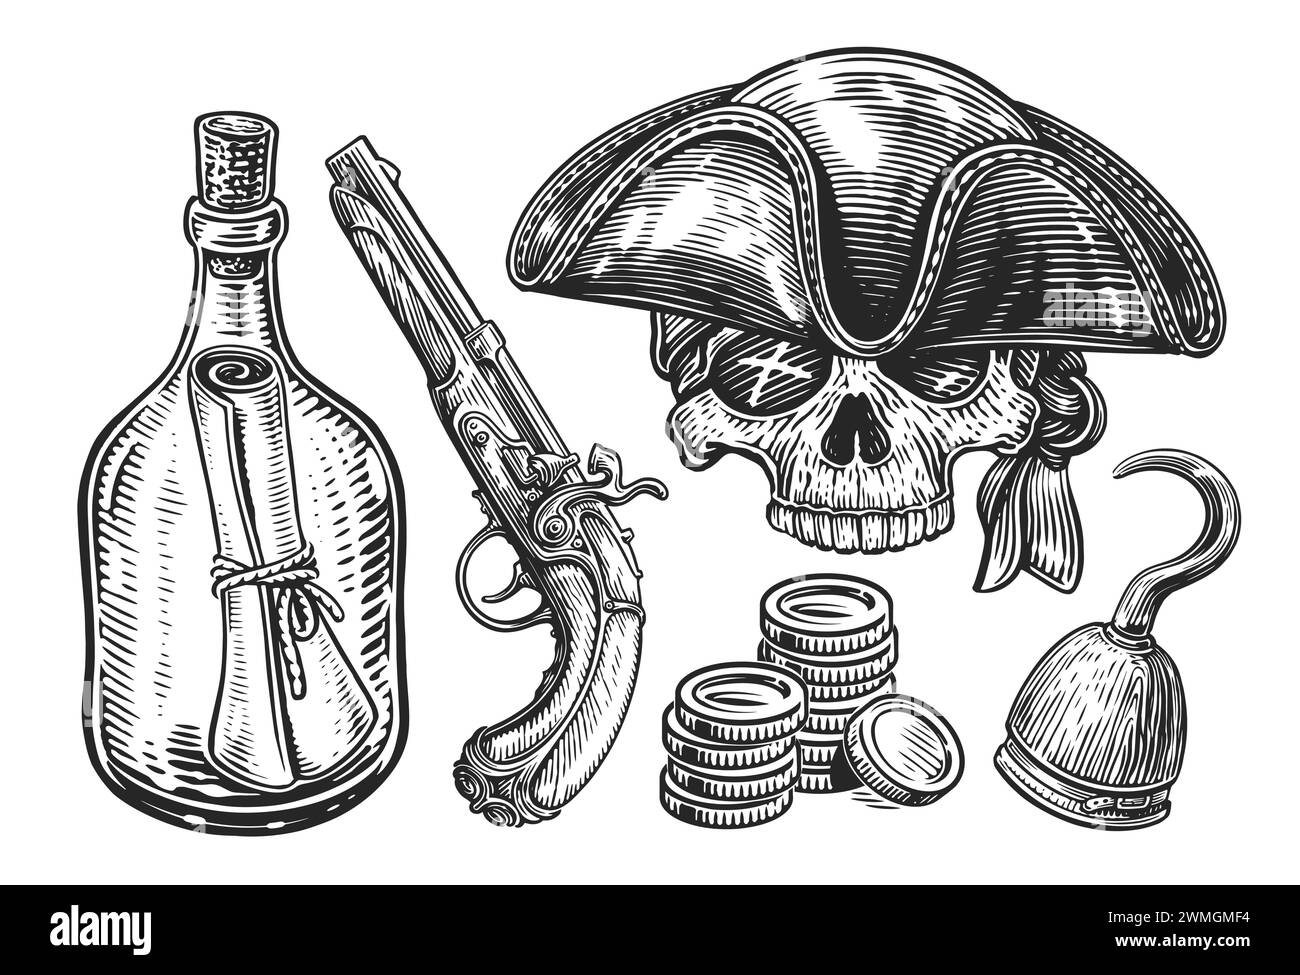 Hand drawn Pirate concept. Sketch vintage vector illustration. Items collection Stock Vector